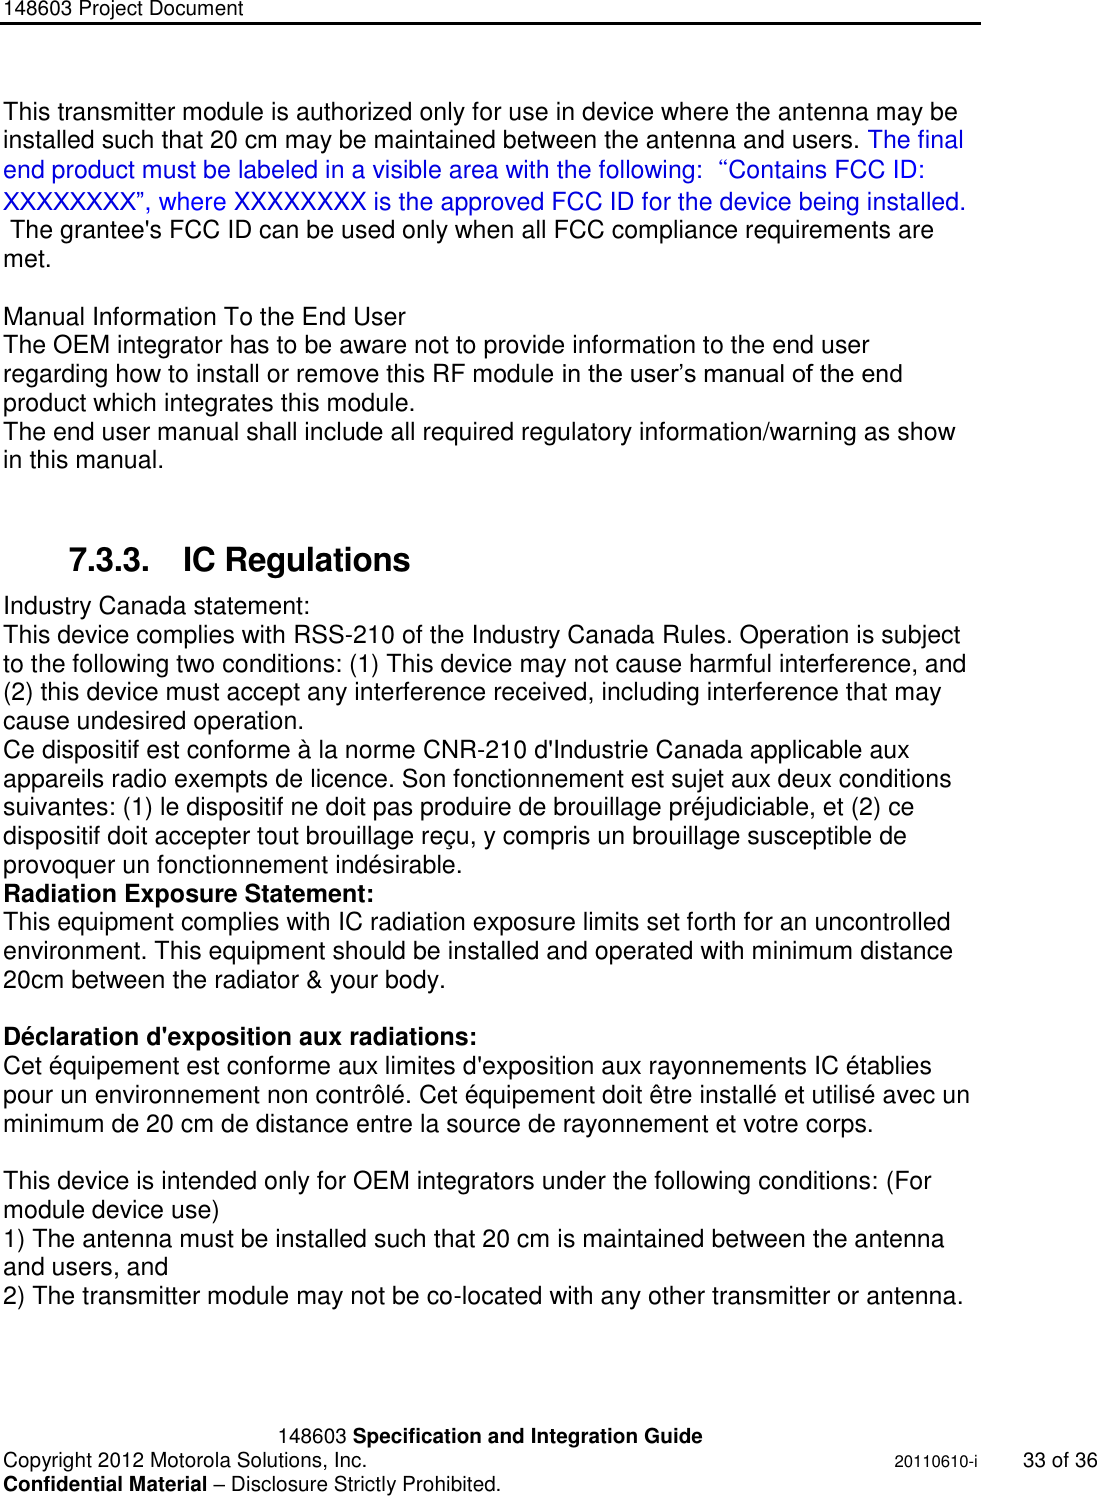 148603 Project Document       148603 Specification and Integration Guide  Copyright 2012 Motorola Solutions, Inc.    20110610-i 33 of 36 Confidential Material – Disclosure Strictly Prohibited. &quot;Ni ckel Leucochroic  Puffin&quot; This transmitter module is authorized only for use in device where the antenna may be installed such that 20 cm may be maintained between the antenna and users. The final end product must be labeled in a visible area with the following:“Contains FCC ID: XXXXXXXX”, where XXXXXXXX is the approved FCC ID for the device being installed.   The grantee&apos;s FCC ID can be used only when all FCC compliance requirements are met.  Manual Information To the End User The OEM integrator has to be aware not to provide information to the end user regarding how to install or remove this RF module in the user‟s manual of the end product which integrates this module. The end user manual shall include all required regulatory information/warning as show in this manual.  7.3.3.  IC Regulations Industry Canada statement: This device complies with RSS-210 of the Industry Canada Rules. Operation is subject to the following two conditions: (1) This device may not cause harmful interference, and (2) this device must accept any interference received, including interference that may cause undesired operation. Ce dispositif est conforme à la norme CNR-210 d&apos;Industrie Canada applicable aux appareils radio exempts de licence. Son fonctionnement est sujet aux deux conditions suivantes: (1) le dispositif ne doit pas produire de brouillage préjudiciable, et (2) ce dispositif doit accepter tout brouillage reçu, y compris un brouillage susceptible de provoquer un fonctionnement indésirable.  Radiation Exposure Statement: This equipment complies with IC radiation exposure limits set forth for an uncontrolled environment. This equipment should be installed and operated with minimum distance 20cm between the radiator &amp; your body.  Déclaration d&apos;exposition aux radiations: Cet équipement est conforme aux limites d&apos;exposition aux rayonnements IC établies pour un environnement non contrôlé. Cet équipement doit être installé et utilisé avec un minimum de 20 cm de distance entre la source de rayonnement et votre corps.  This device is intended only for OEM integrators under the following conditions: (For module device use) 1) The antenna must be installed such that 20 cm is maintained between the antenna and users, and  2) The transmitter module may not be co-located with any other transmitter or antenna.  